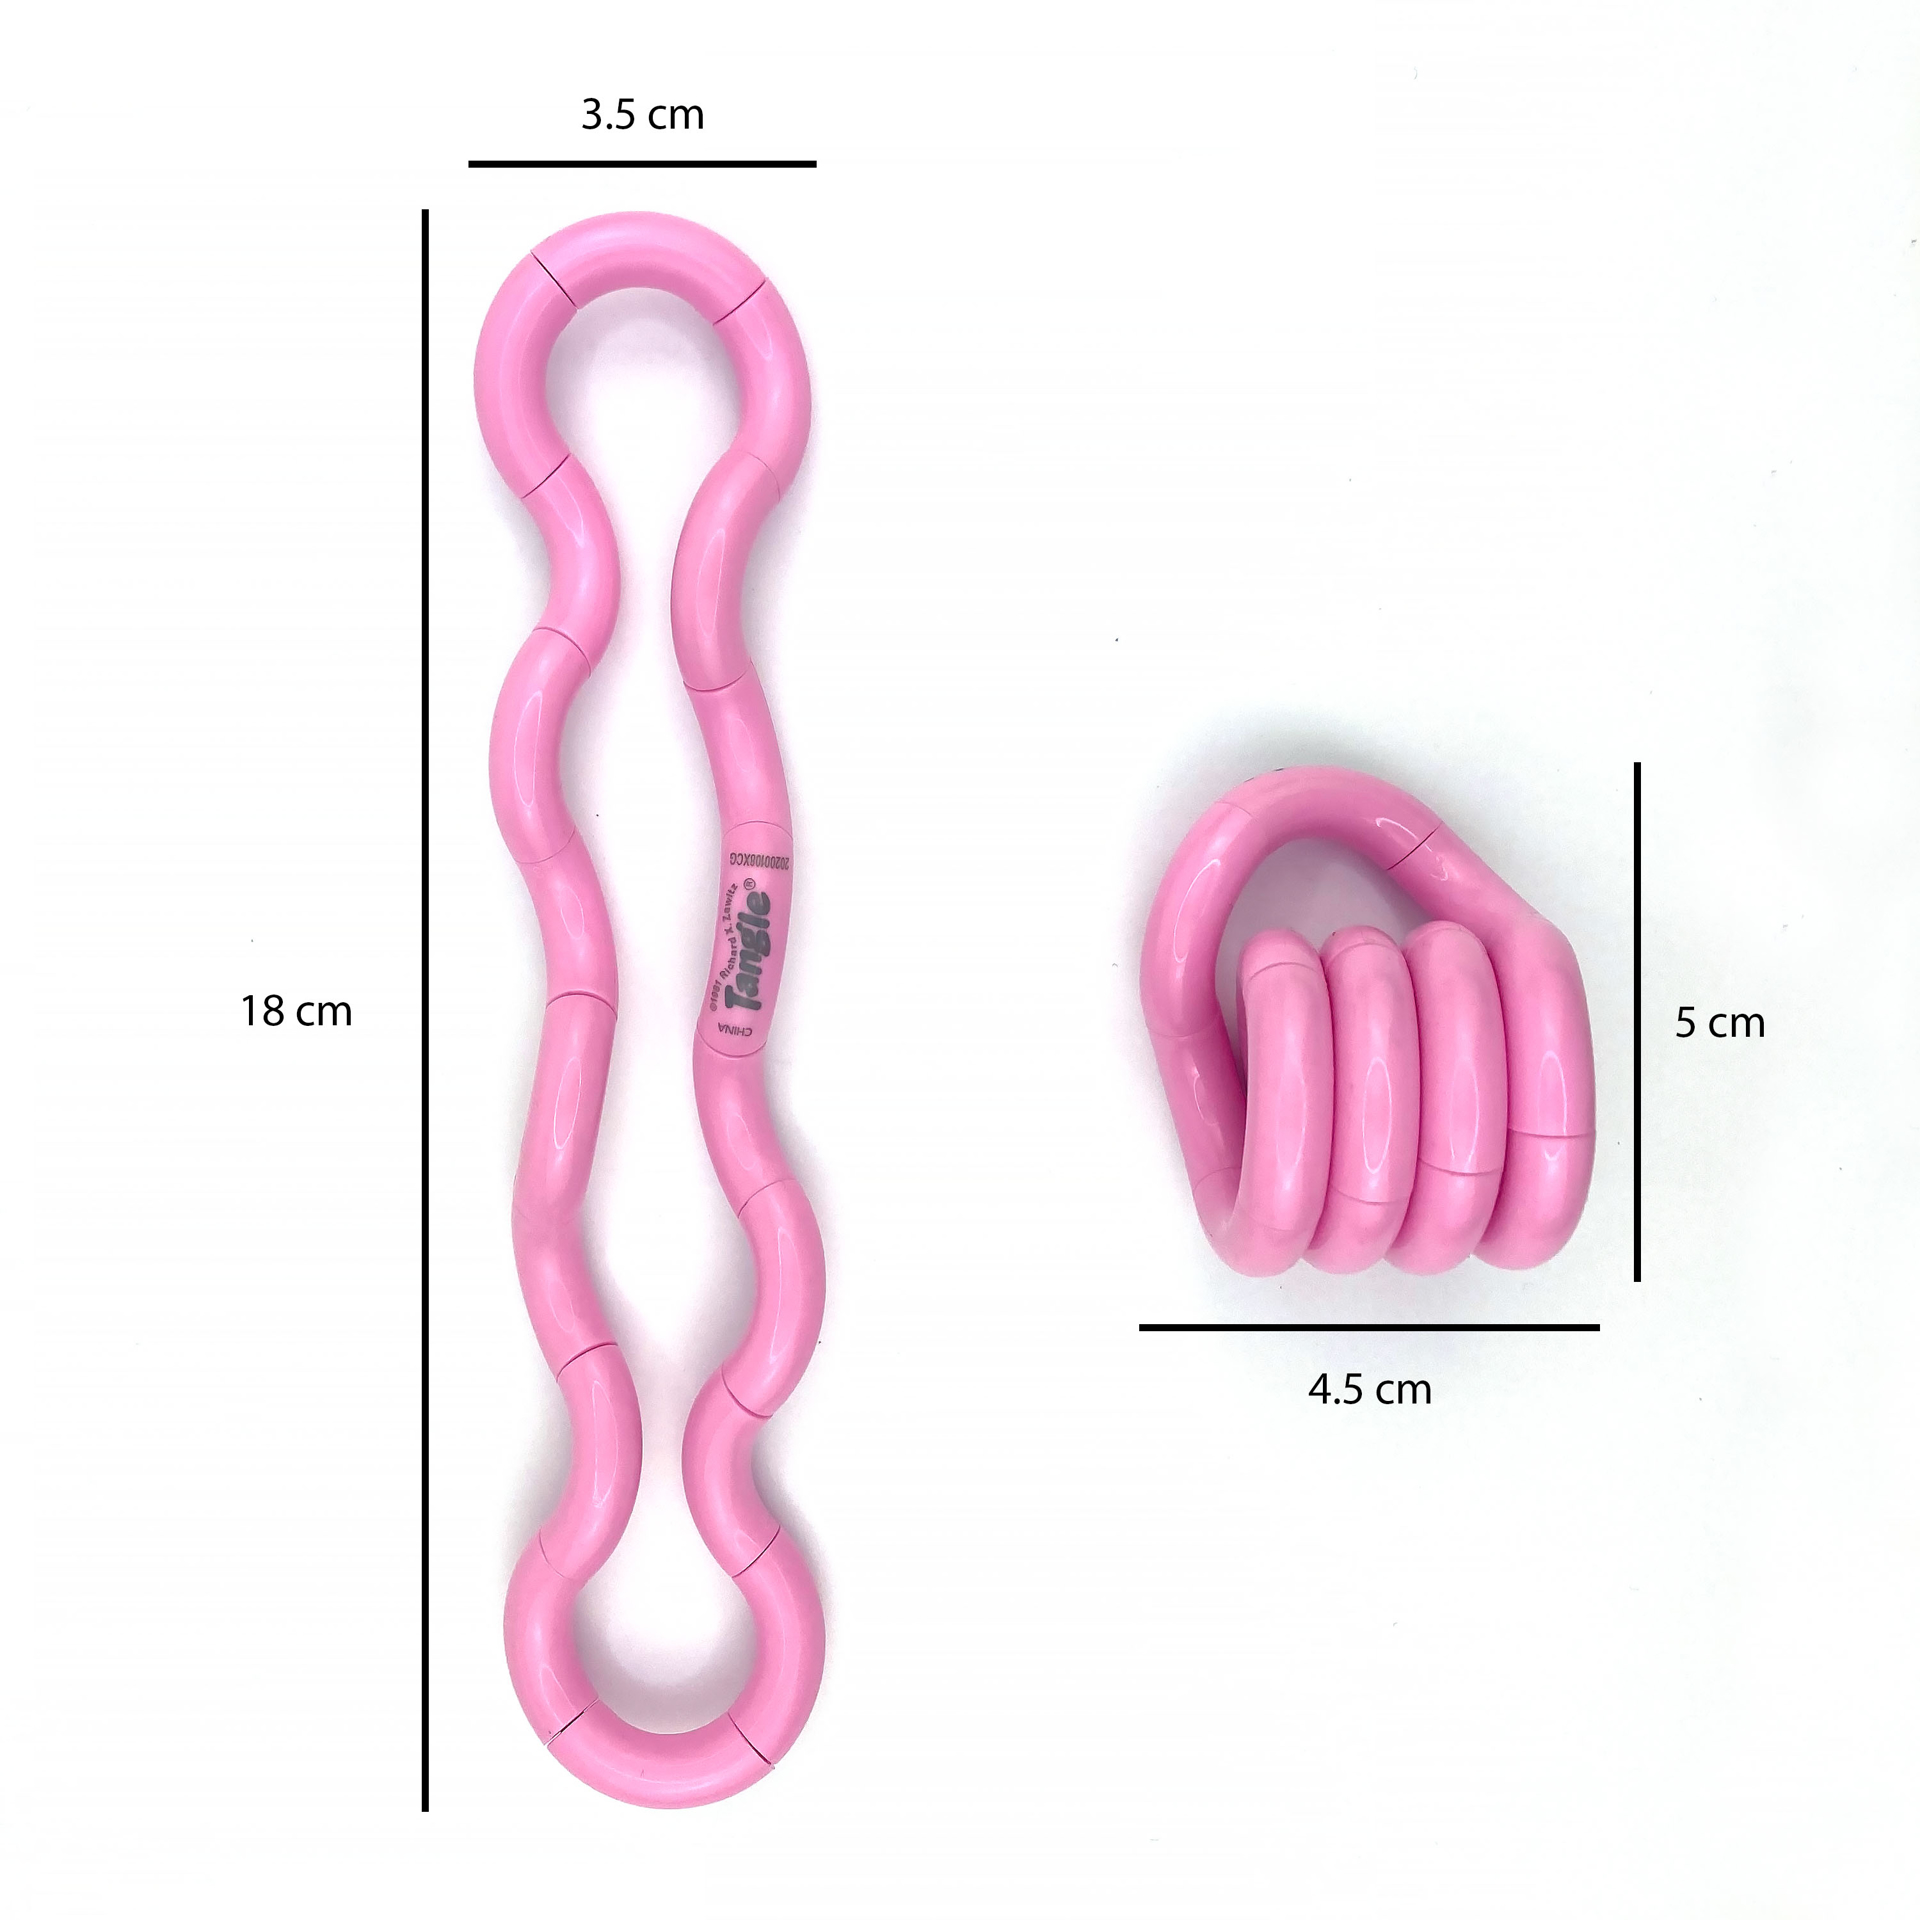 solid pink tangle with measurements